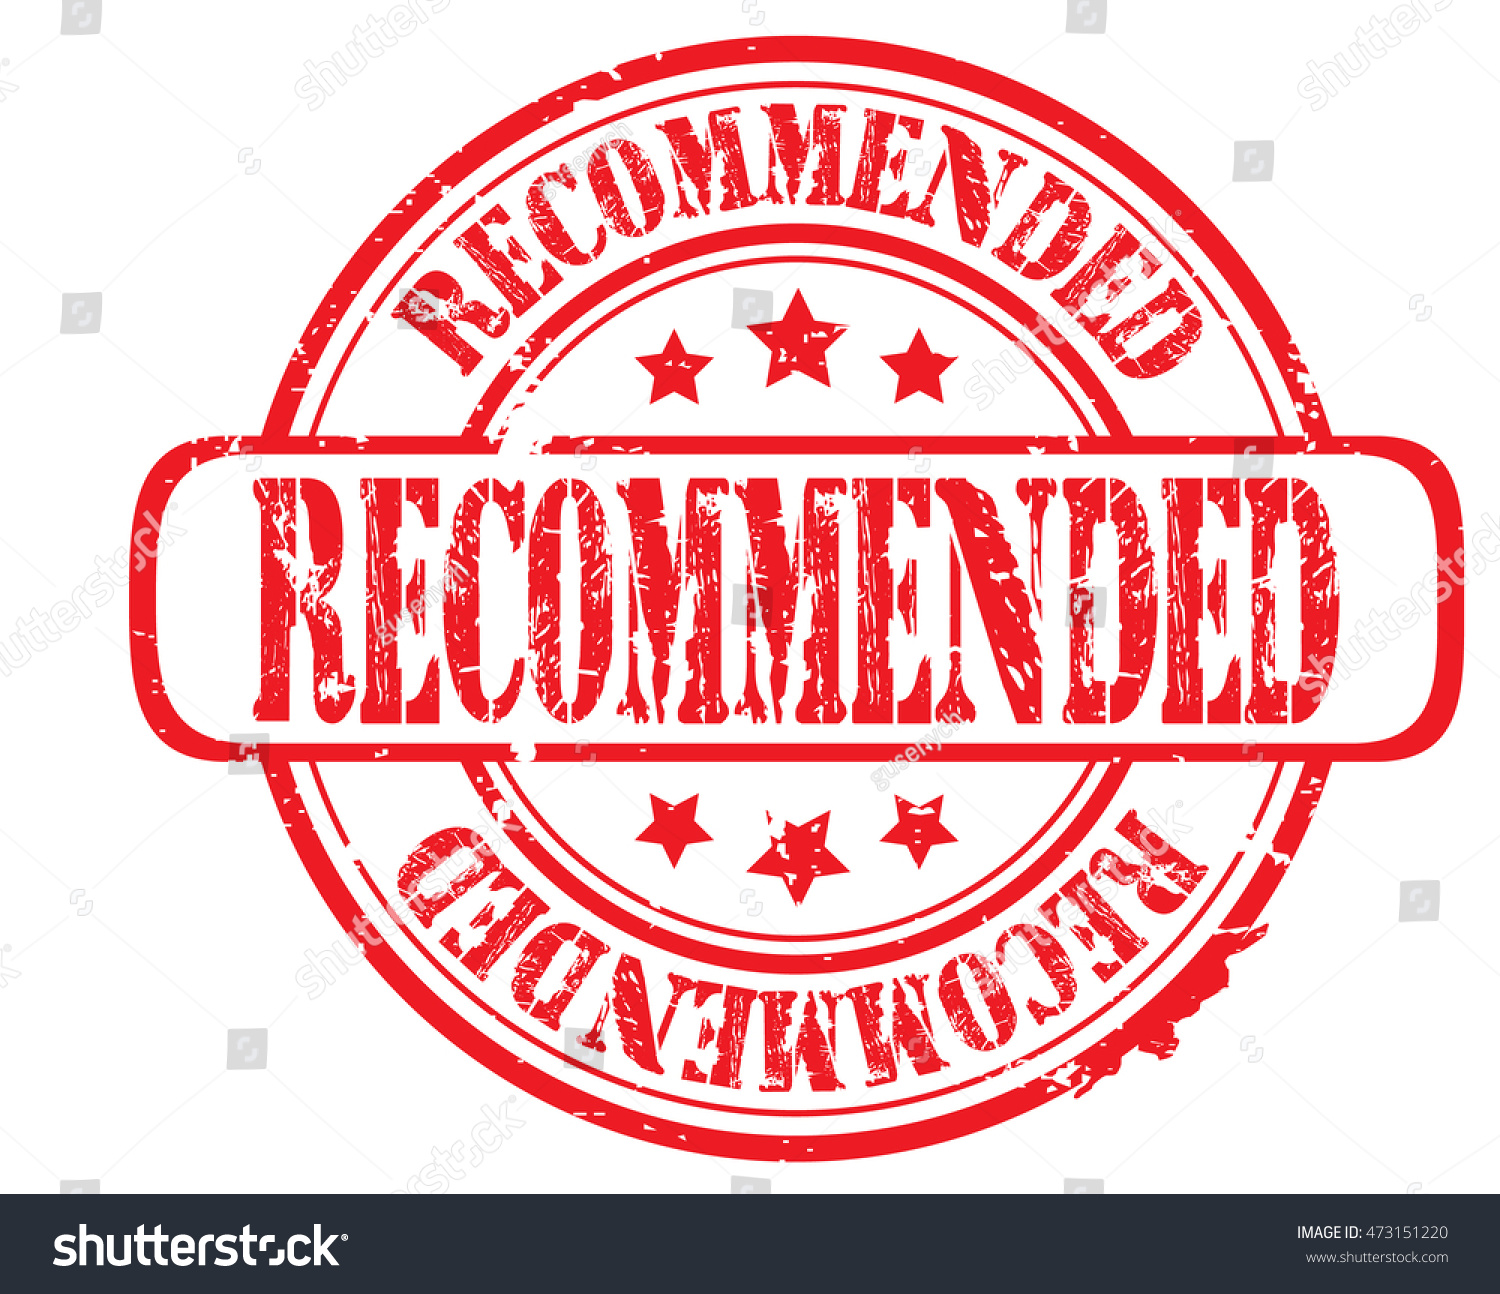 Rubber Stamp With Text "Recommended" On White, Vector Illustration